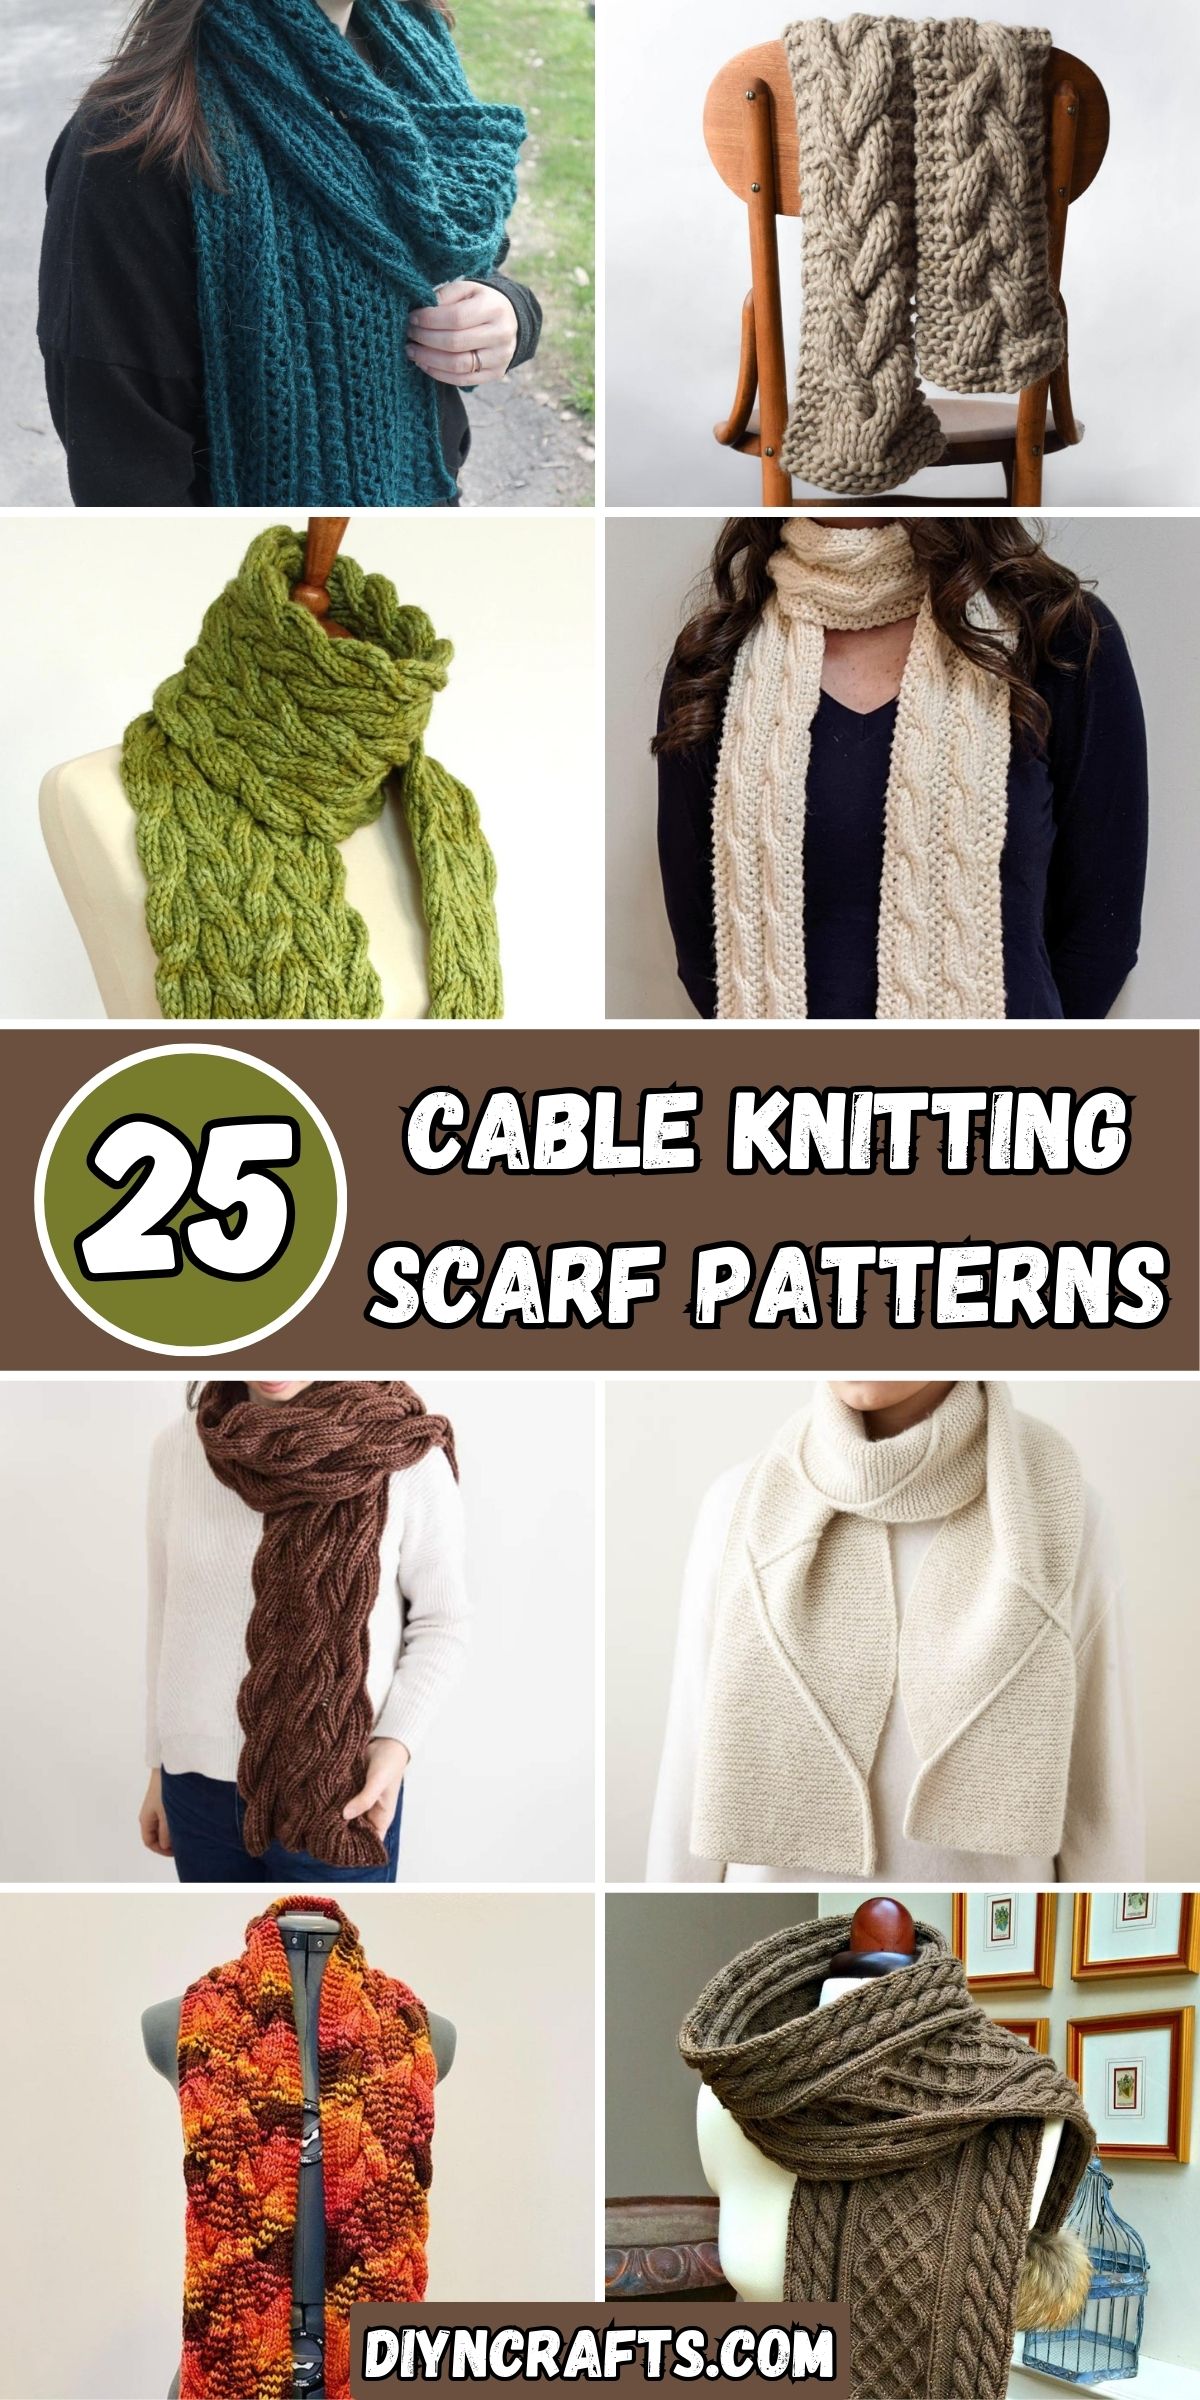 25 Cable Knitting Scarf Patterns collage.